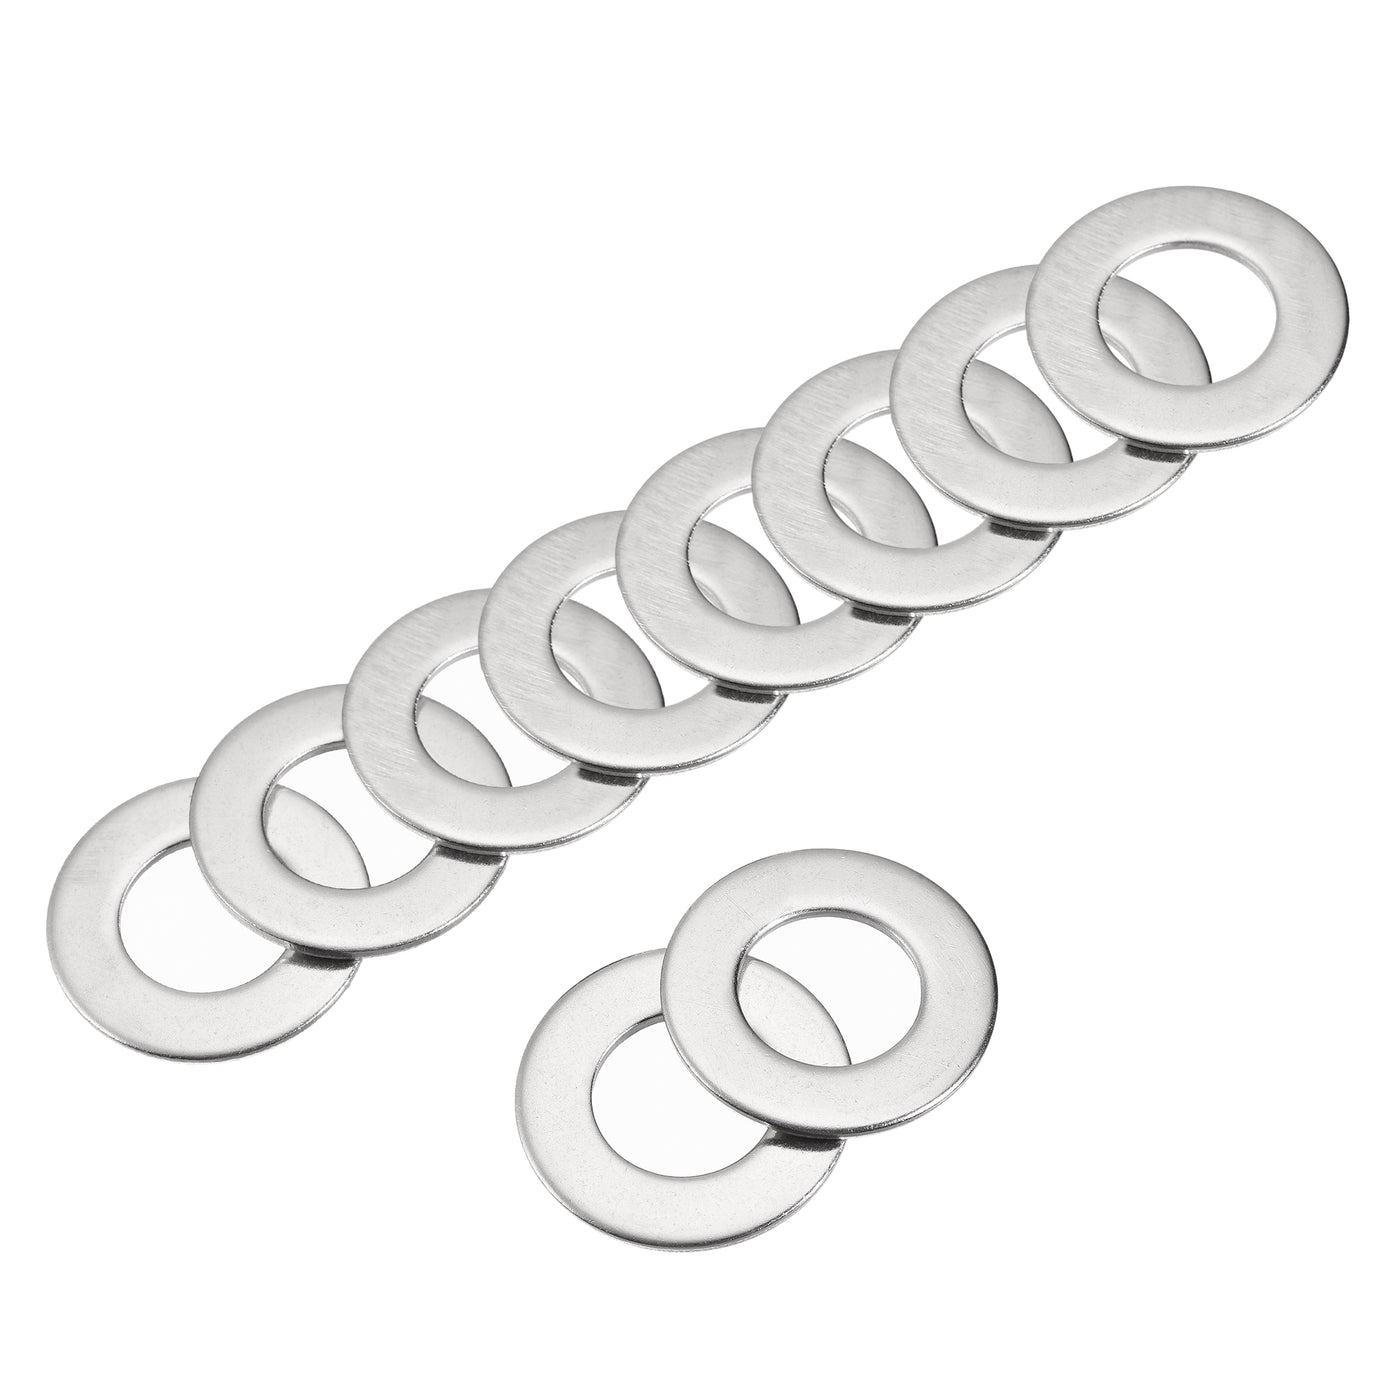 uxcell Uxcell 316 Stainless Steel Flat Washer for Screw Bolt